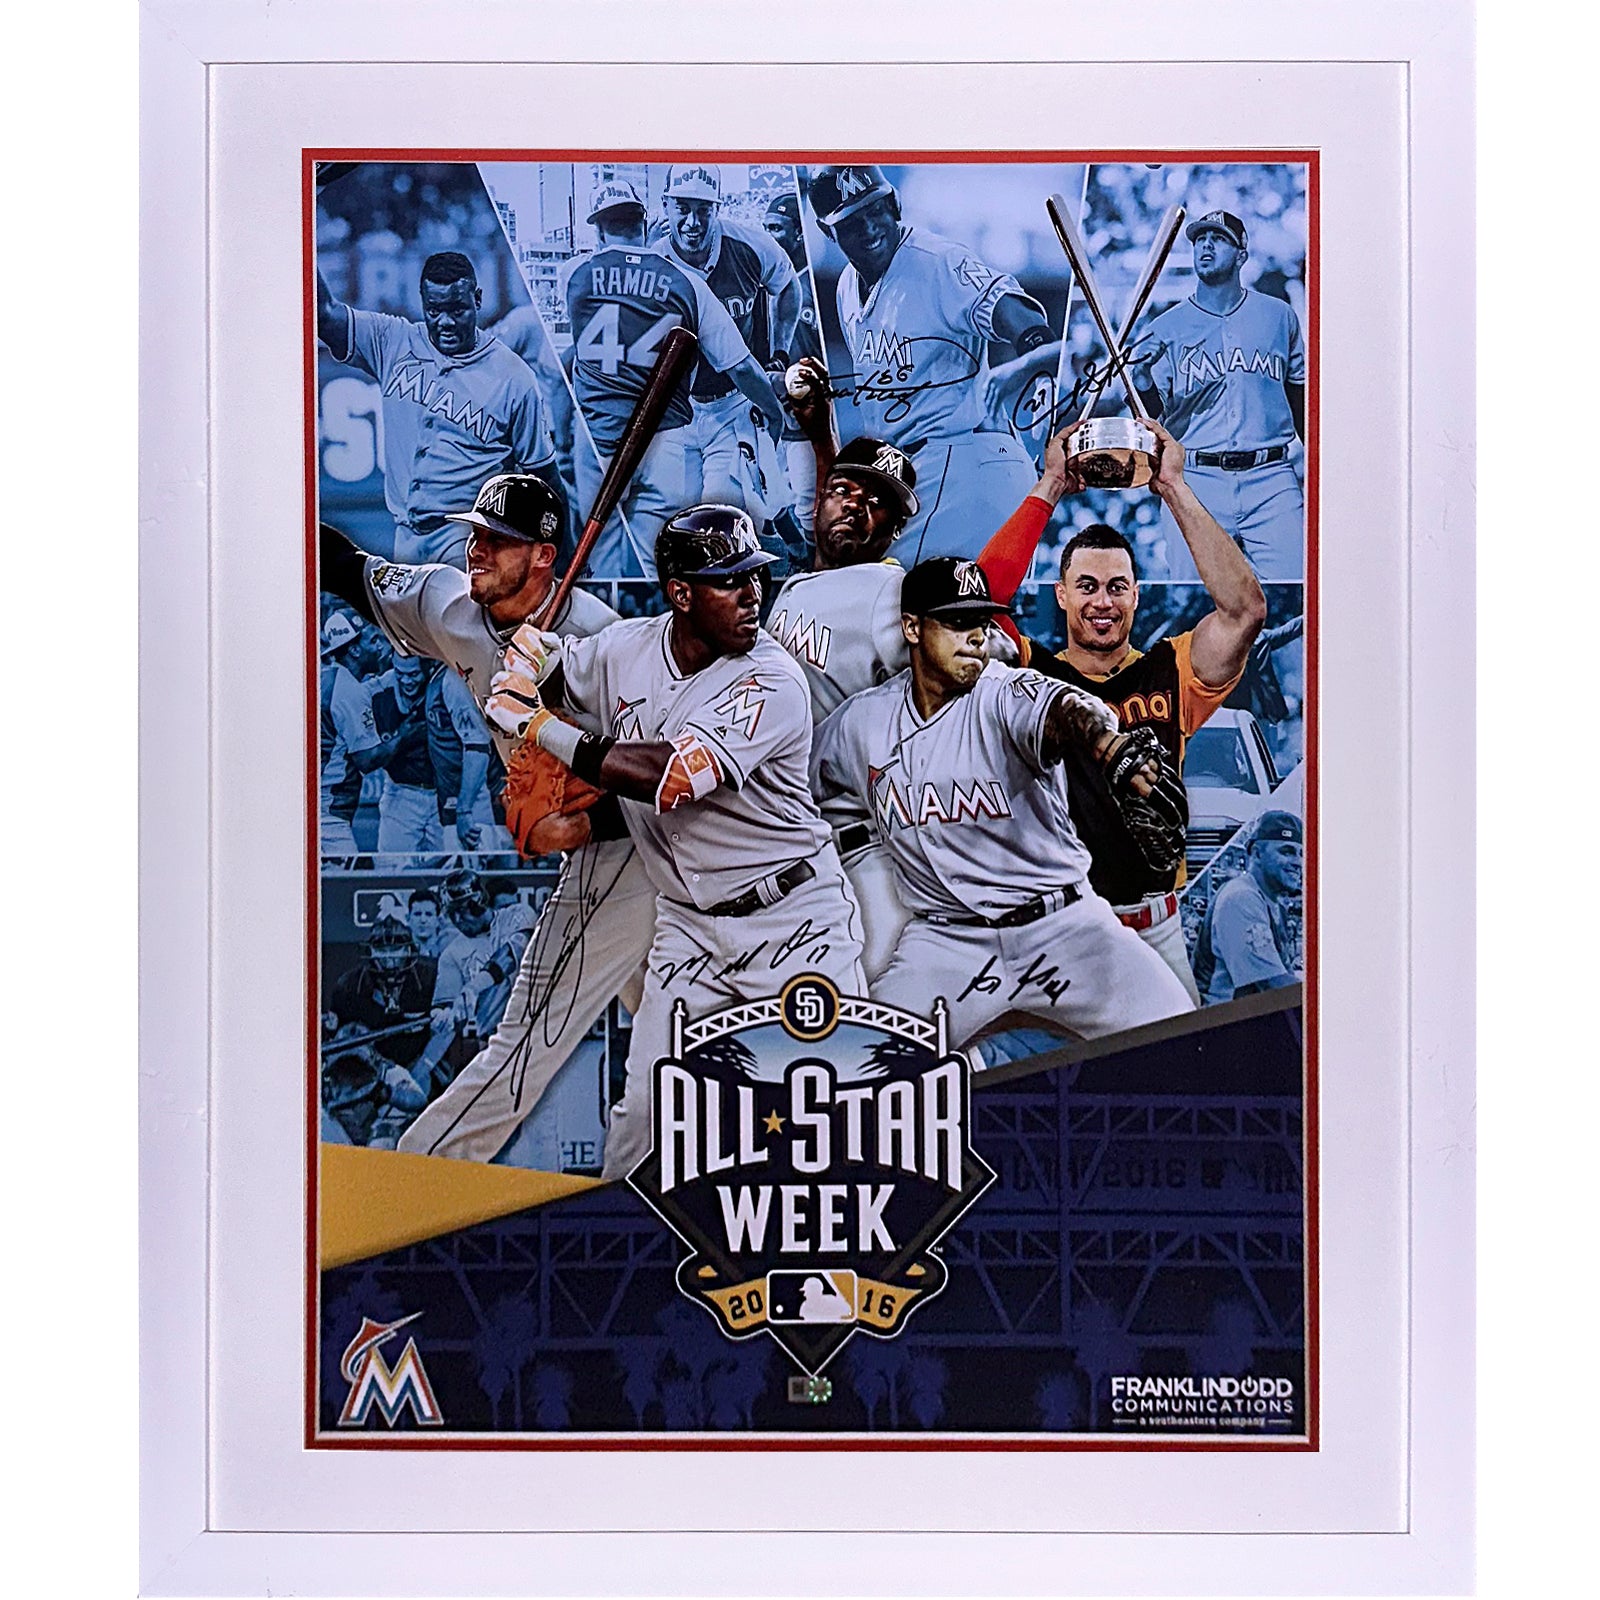 Jose Fernandez, Giancarlo Stanton, Ozuna, Ramos And Rodney Autographed Miami Marlins 2016 All Star Game Deluxe Framed 18